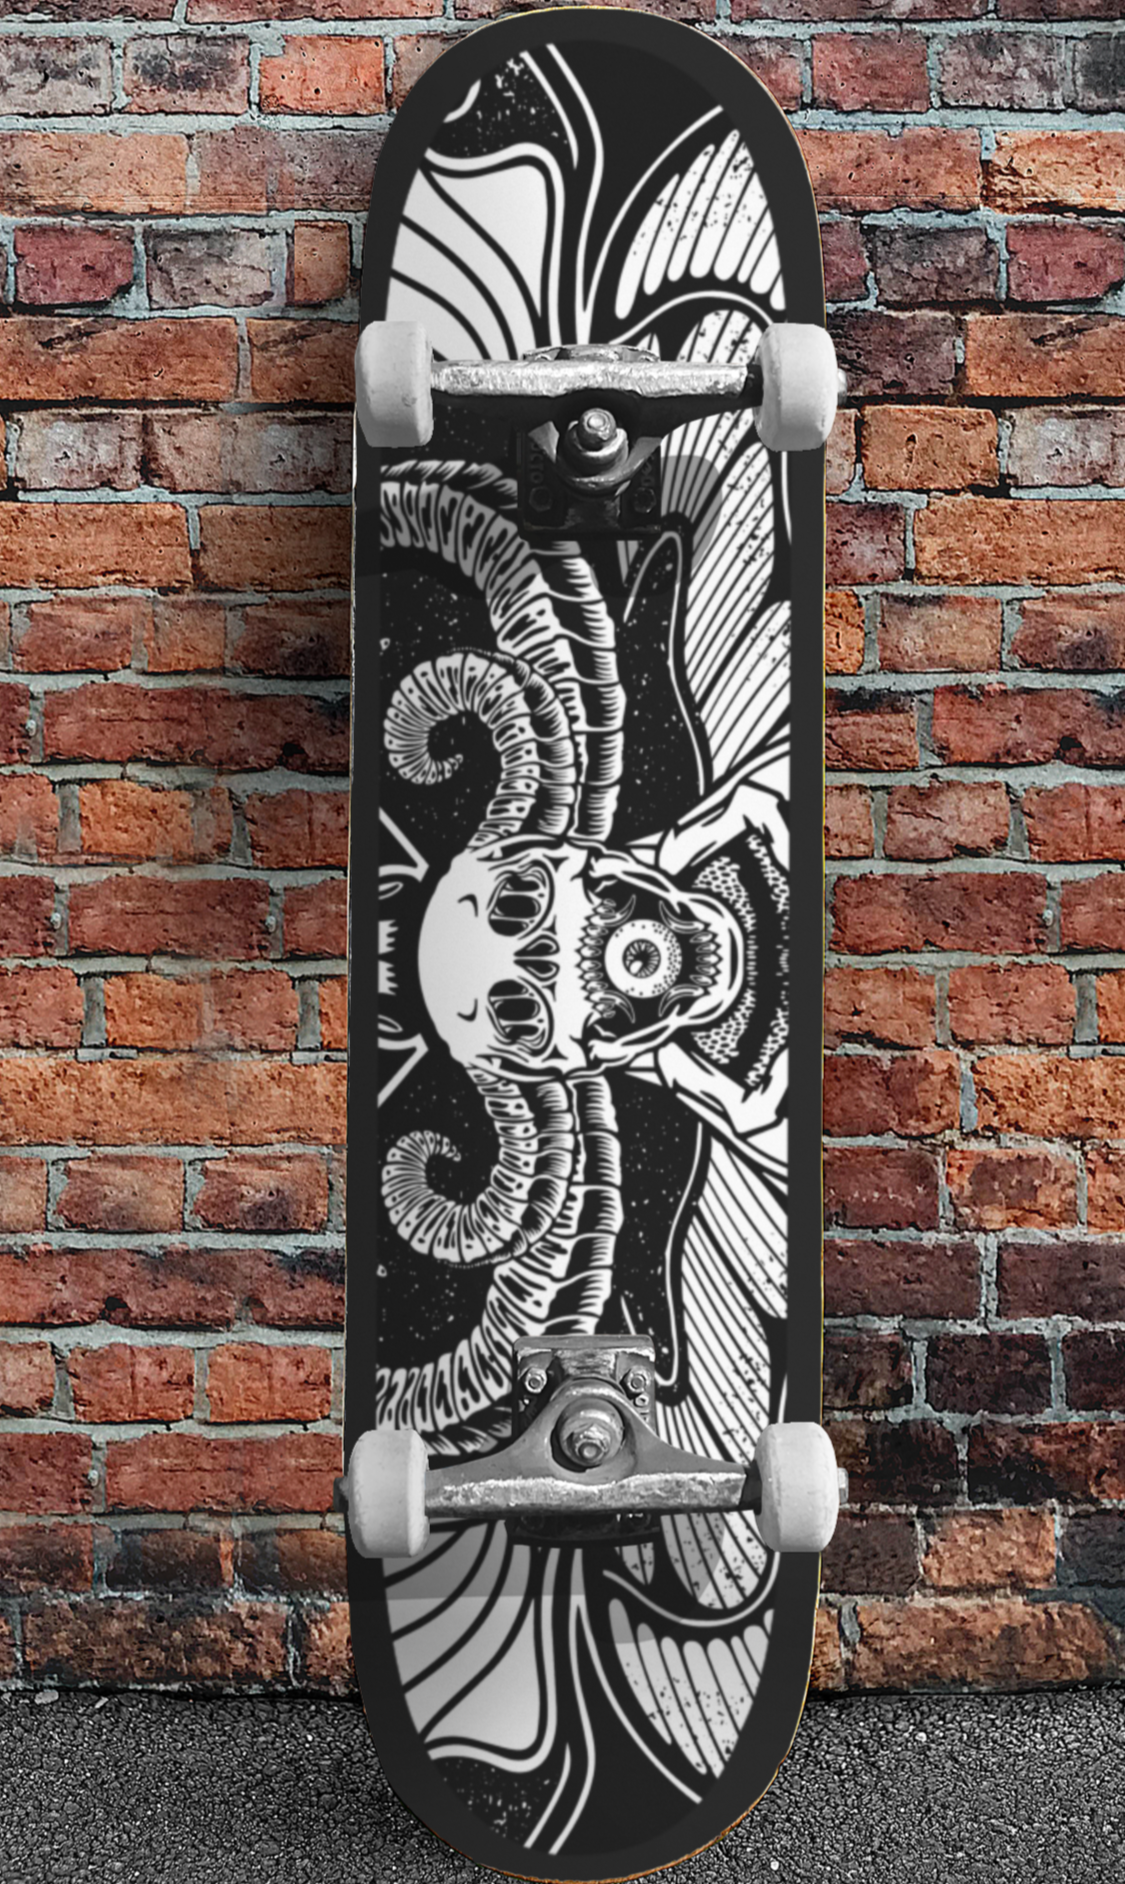 THE LIGHT IS NOT YOUR FRIEND 8-inch Skate Deck